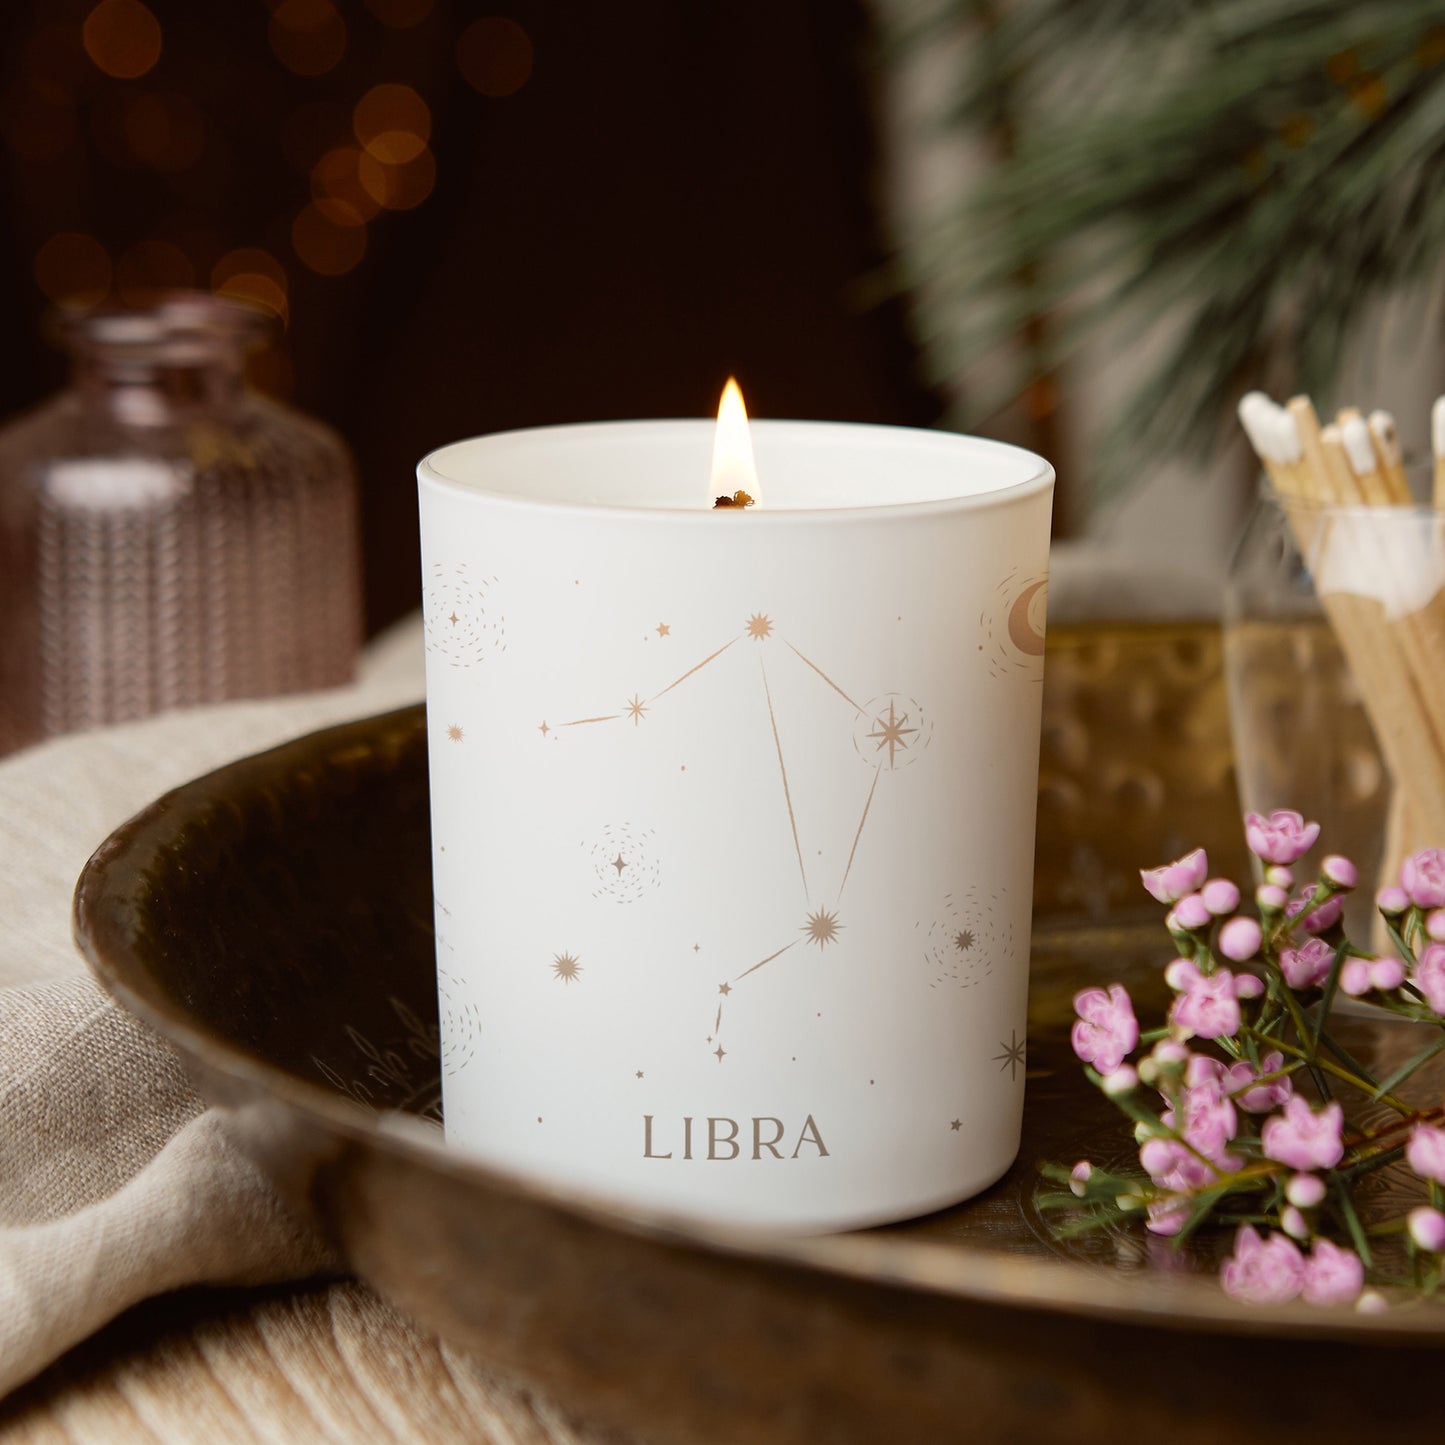 Libra Star Sign Candle Gift Zodiac Constellation Glow Through Candle